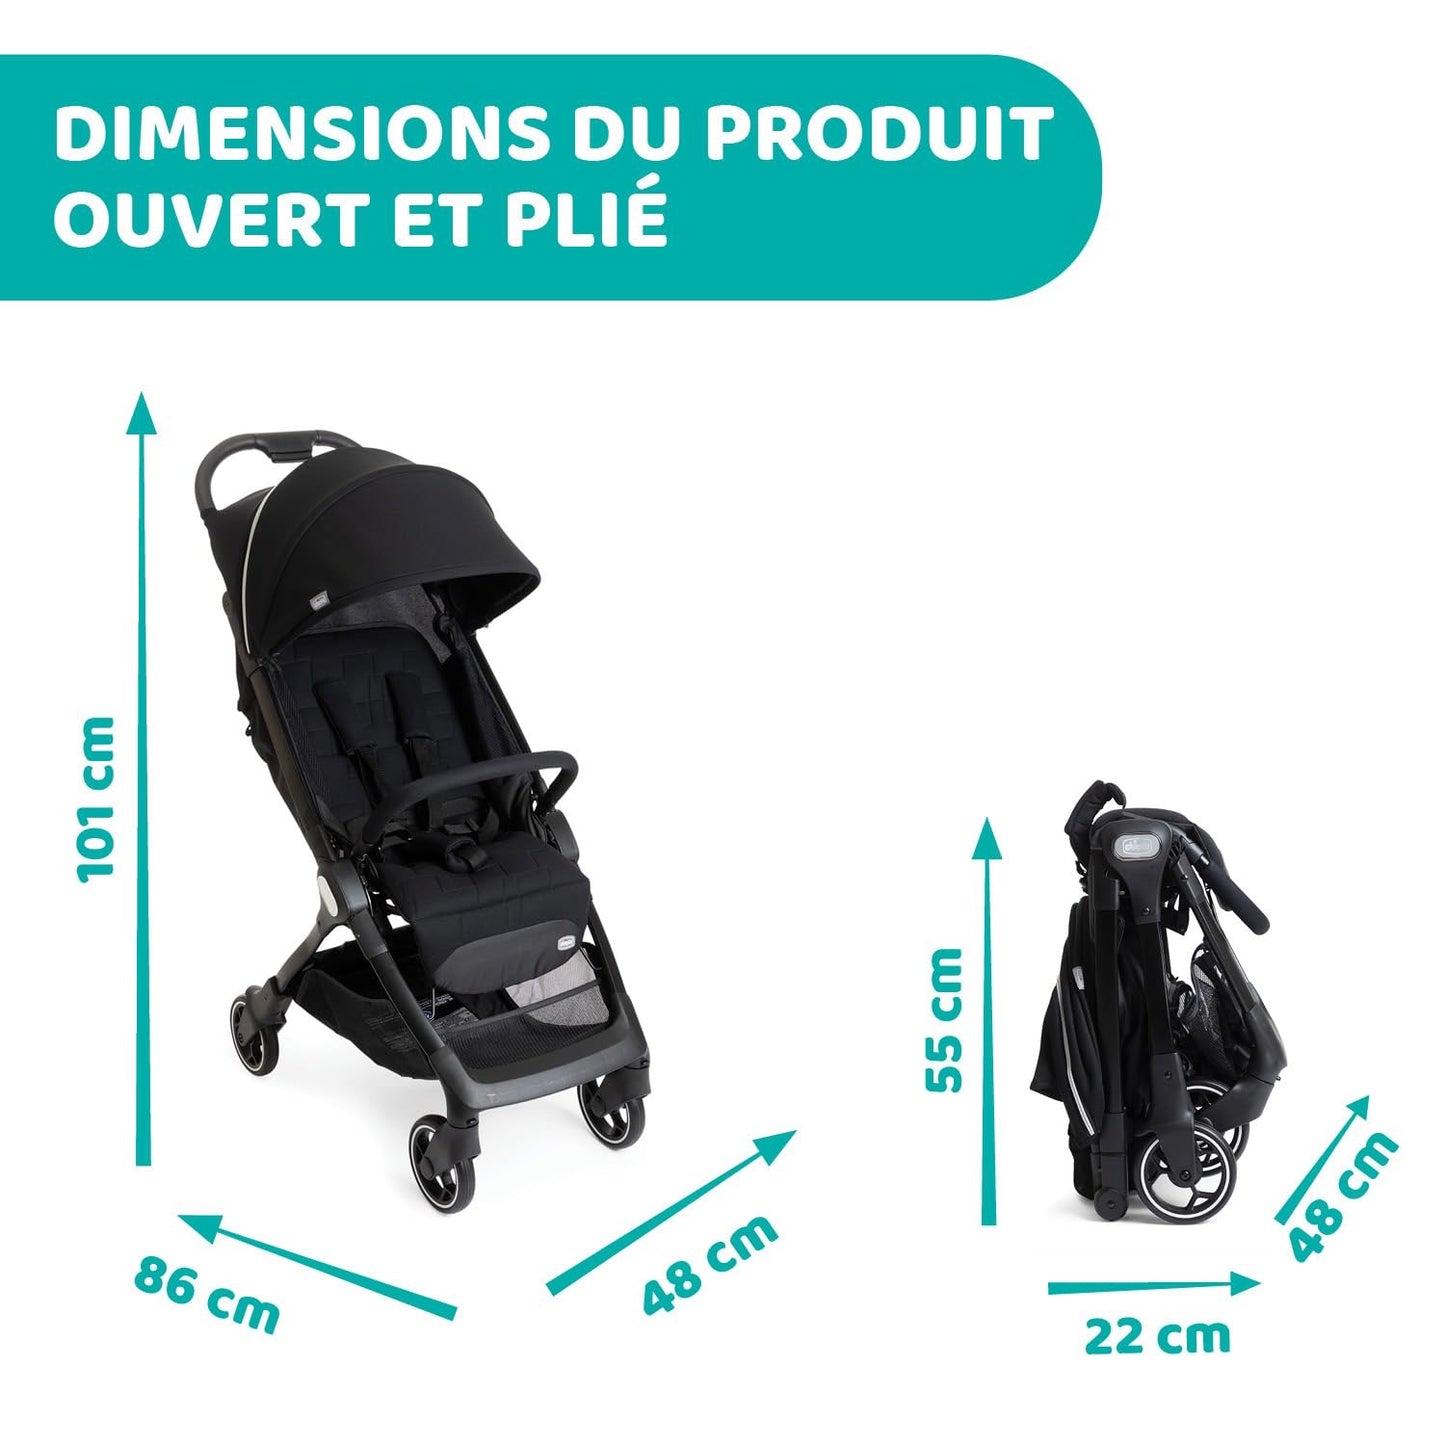 Chicco WE Stroller